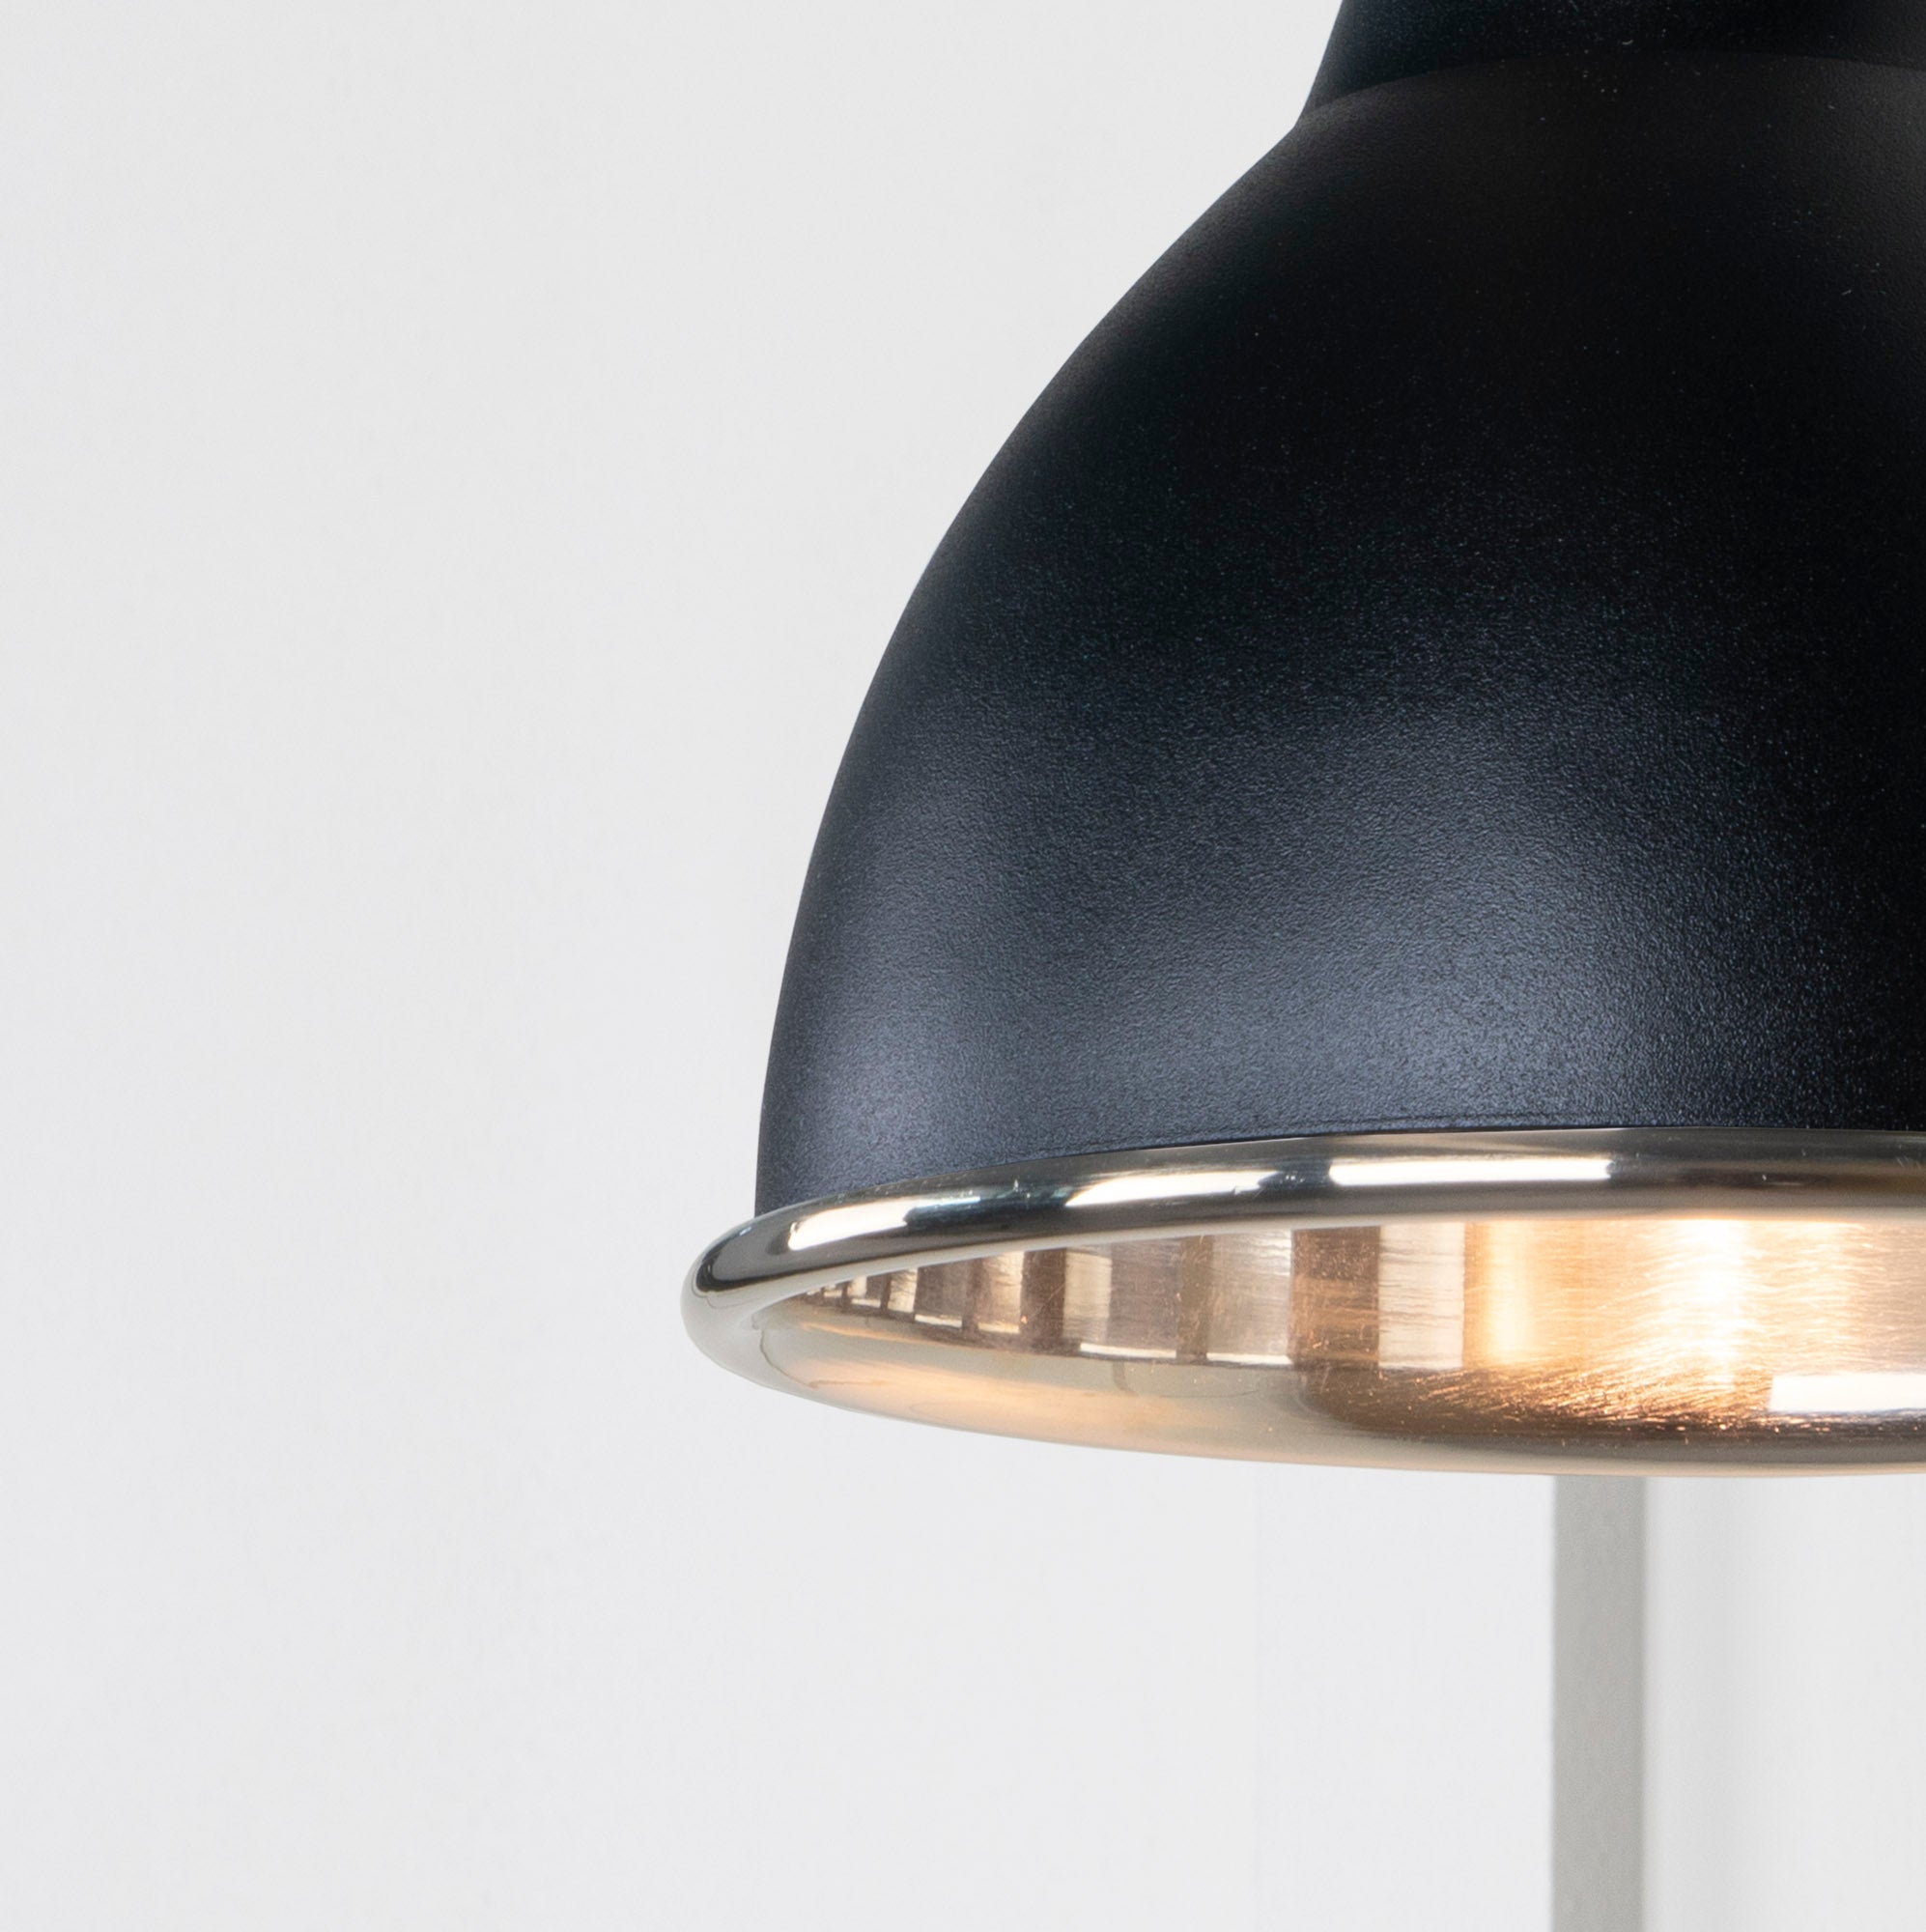 SHOW Close Up image of Brindley Wall Light in Elan Black in Smooth Nickel